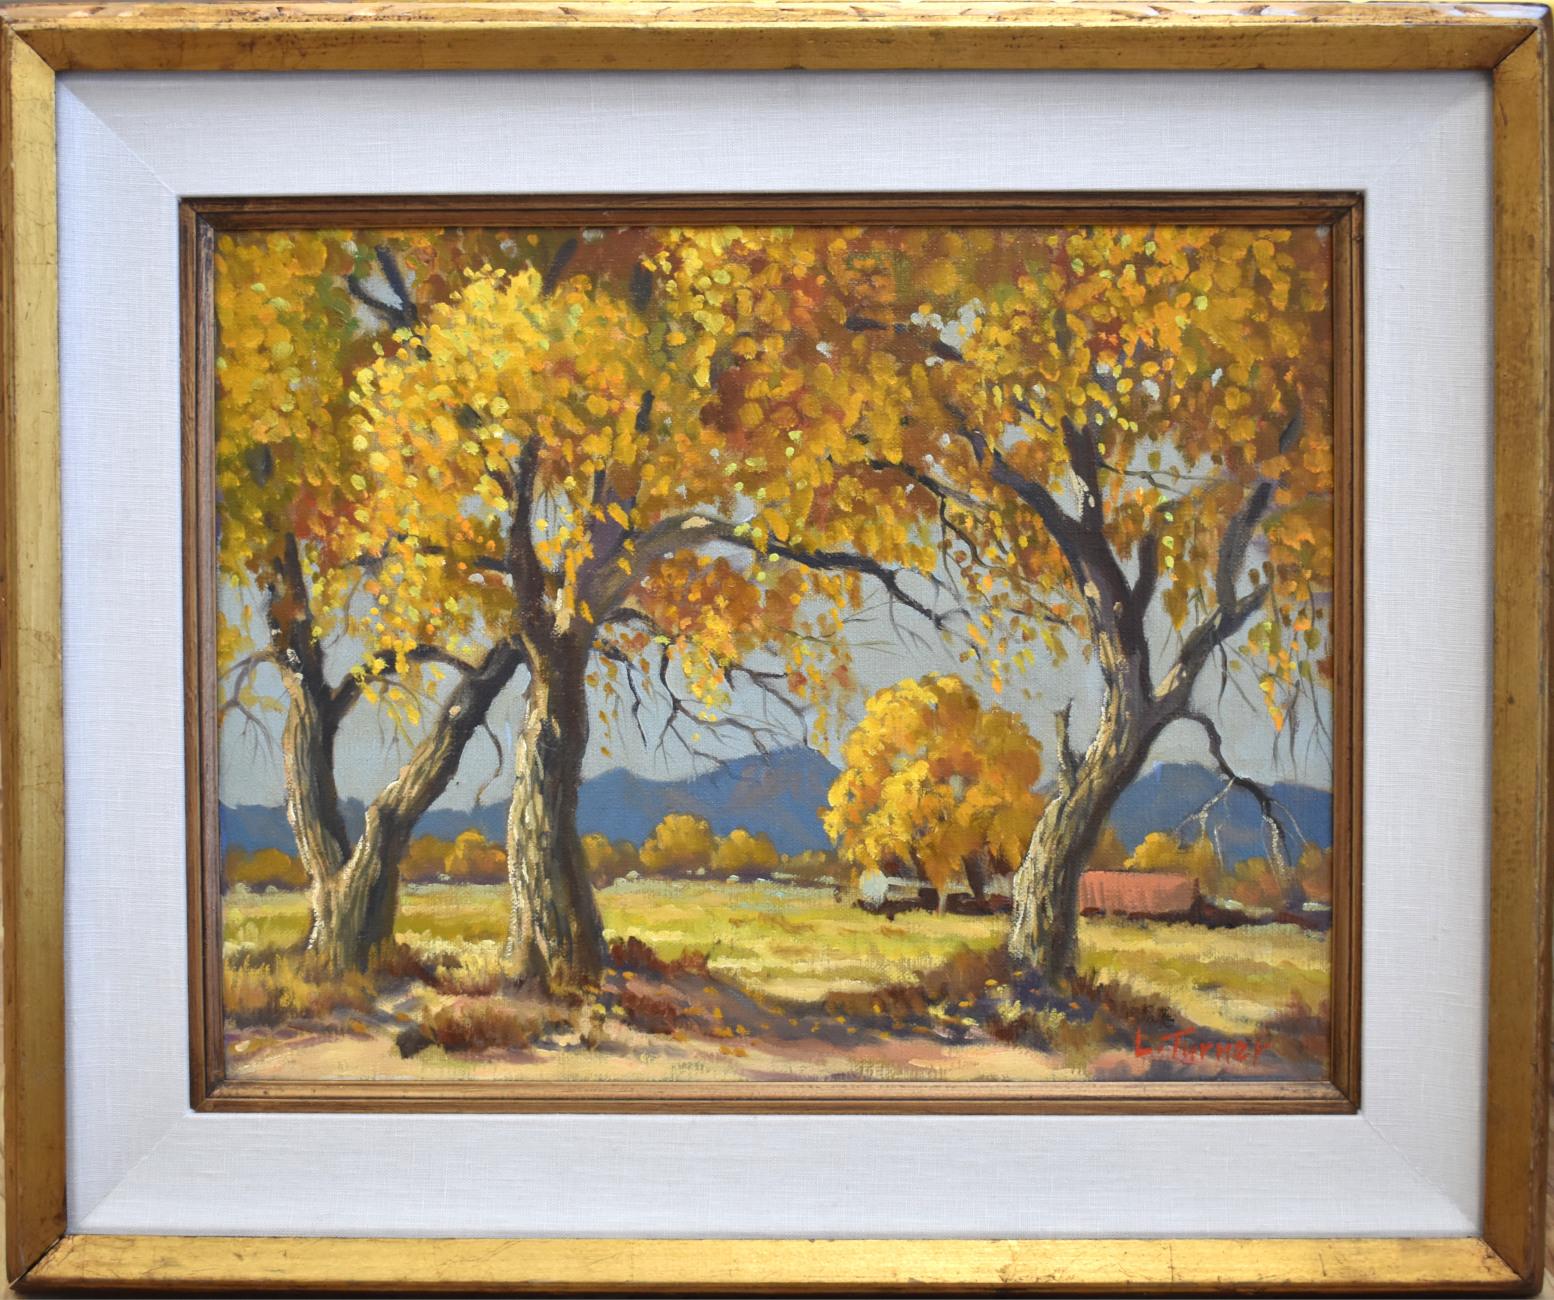 Leona Turner Landscape Painting - "Cottonwoods at Peralta" New Mexico     Fall Scene